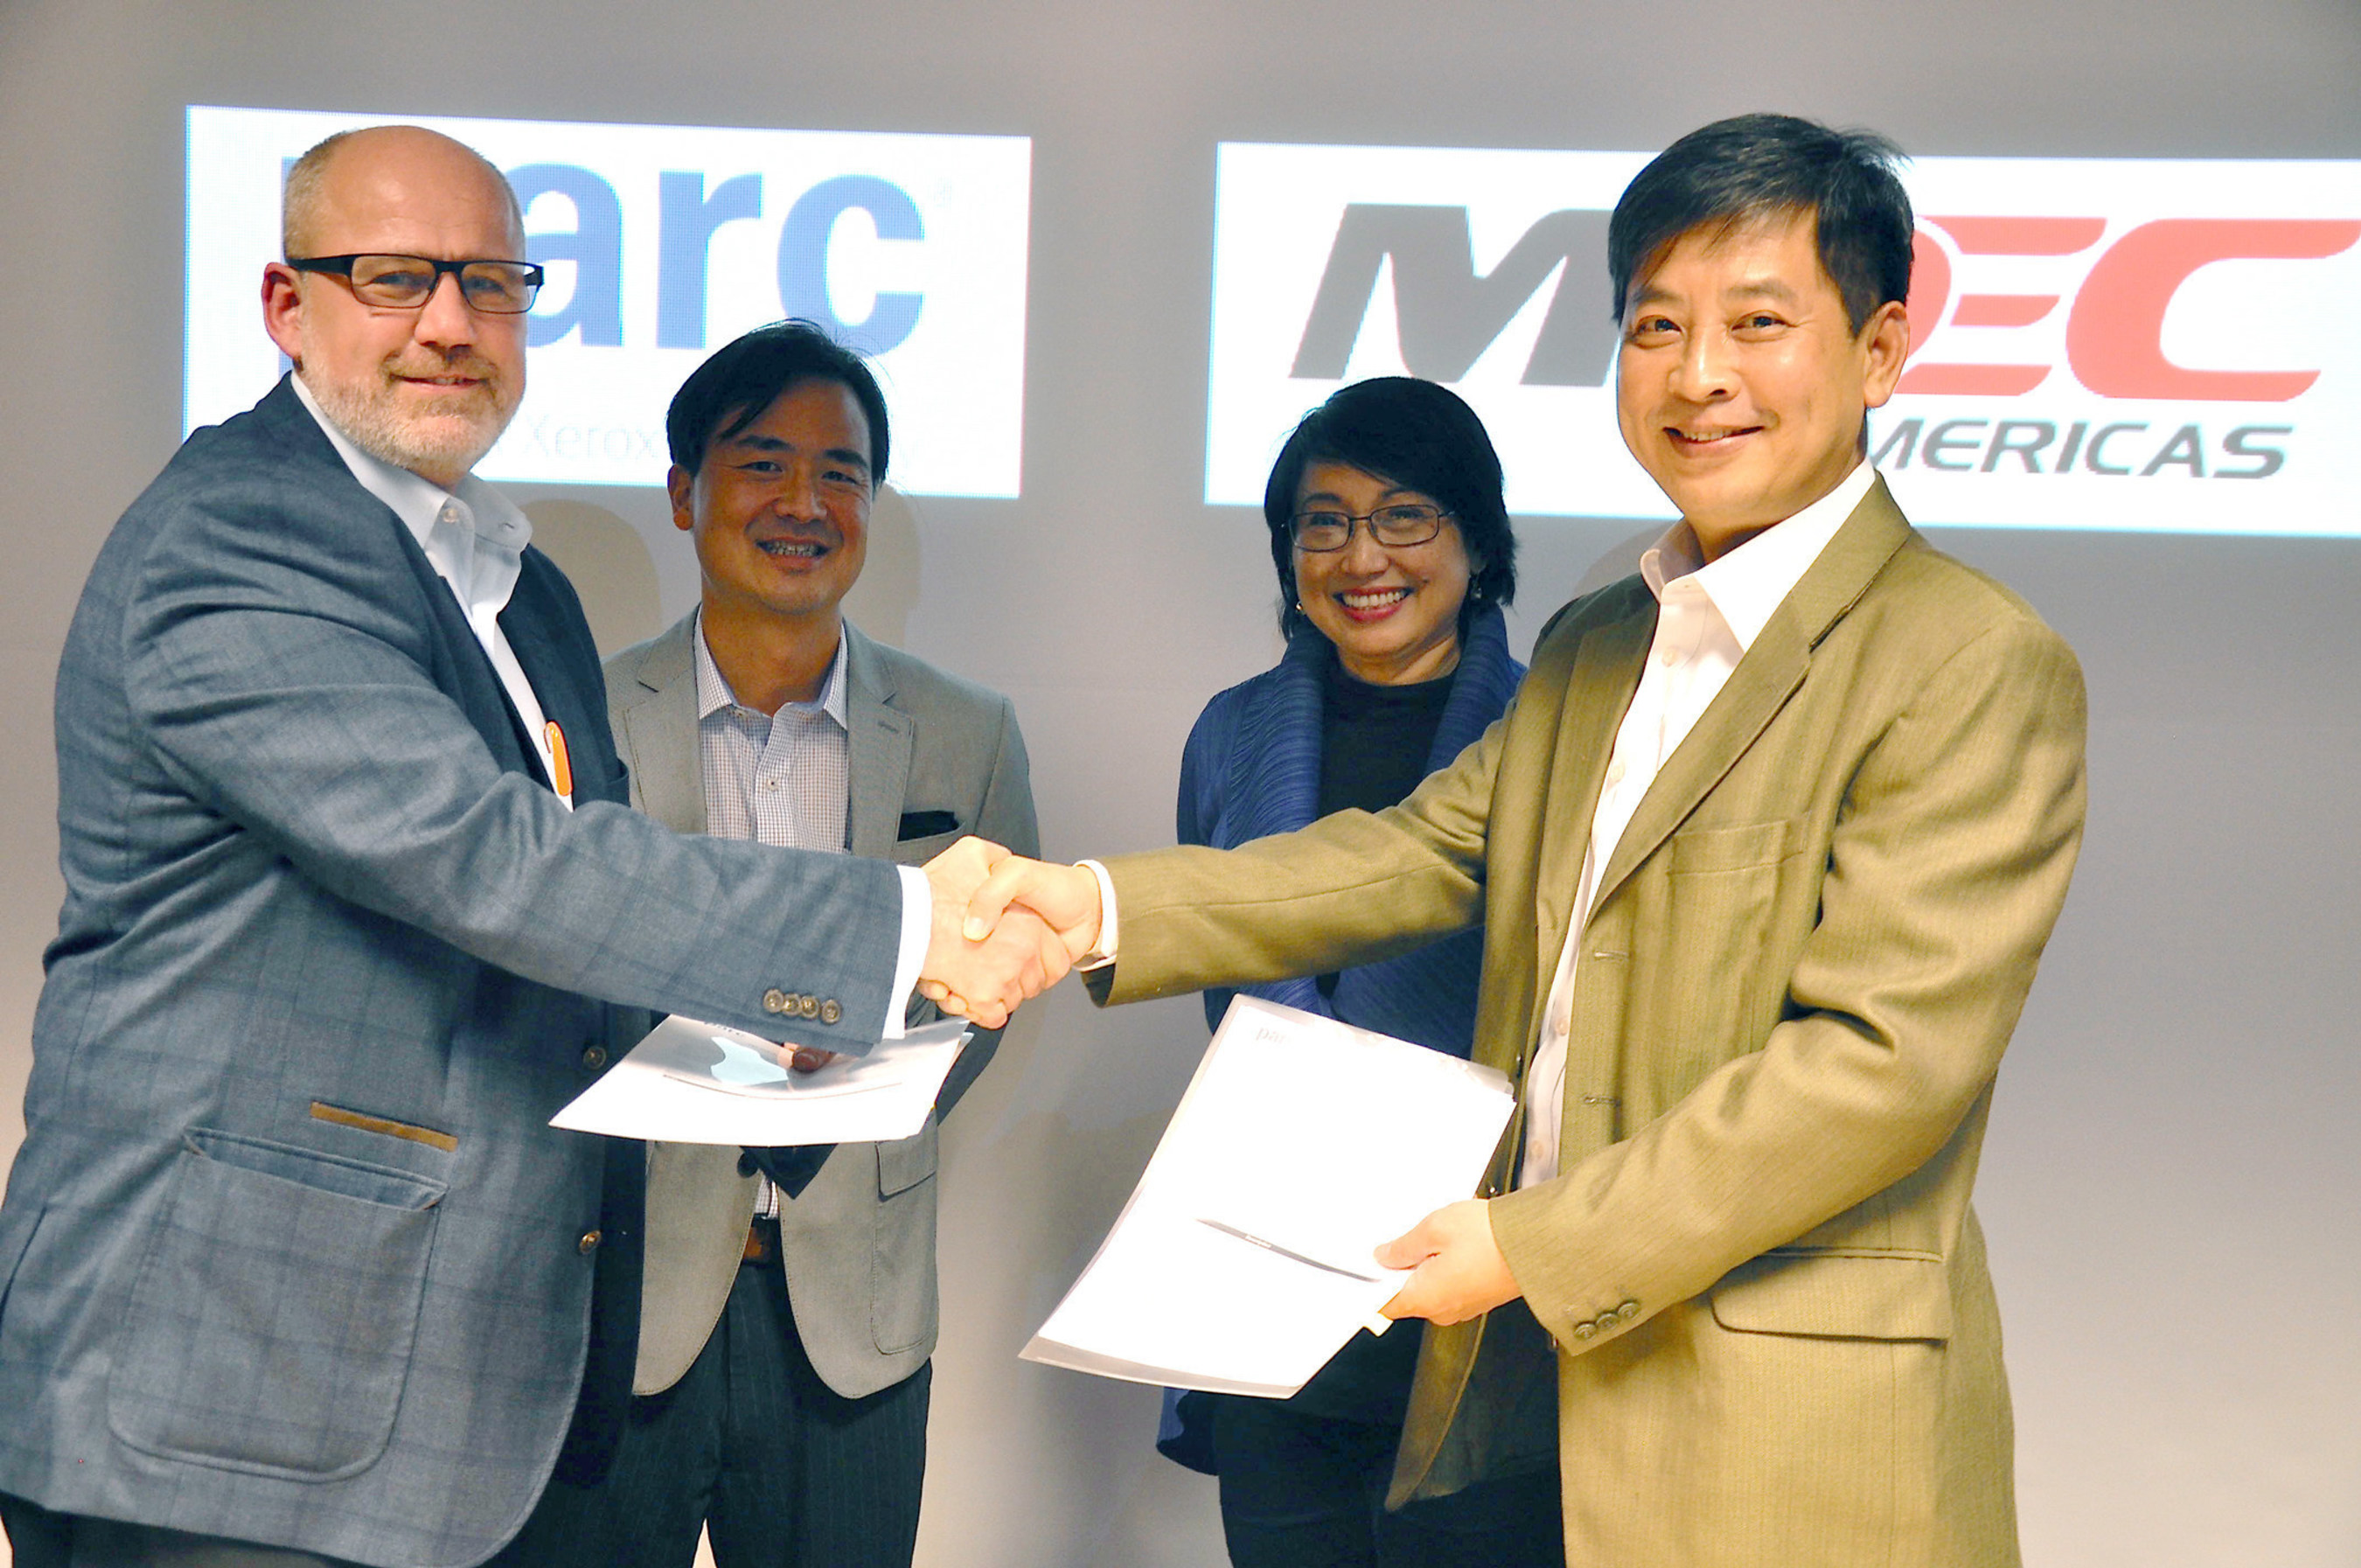 PARC MoU exchange by Stephen Hoover, CEO of PARC & Dato' Dan E Khoo, President of MDeC Americas (foreground, left to right), witnessed by Aki Ohashi, PARC’s Director of Business Development and Dato' Yasmin Mahmood, CEO of MDeC (second row, left to right)